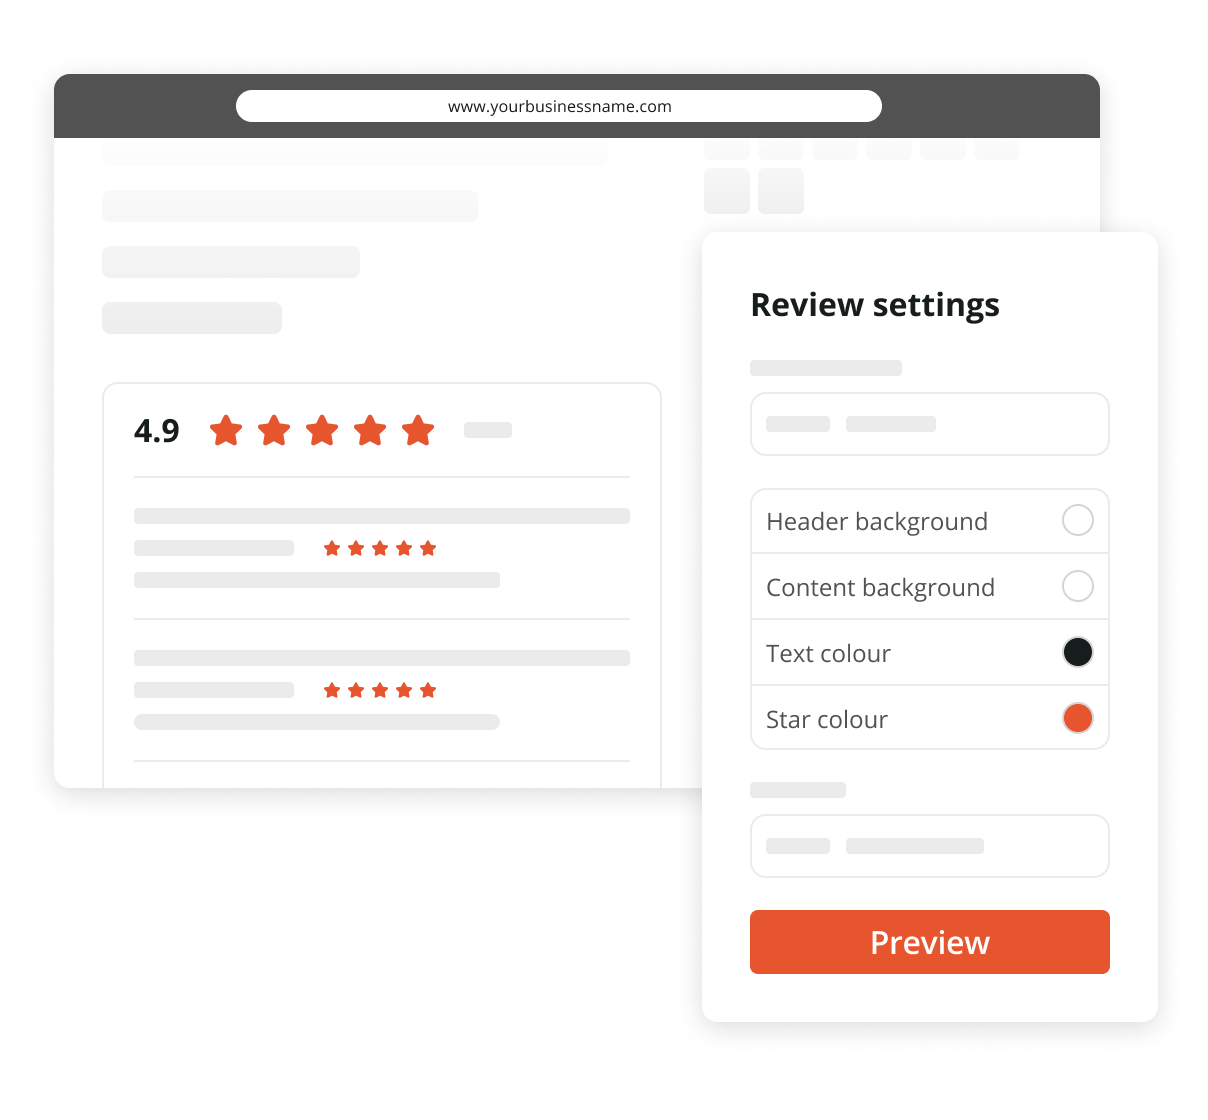 Drive more bookings with the Reviews Widget